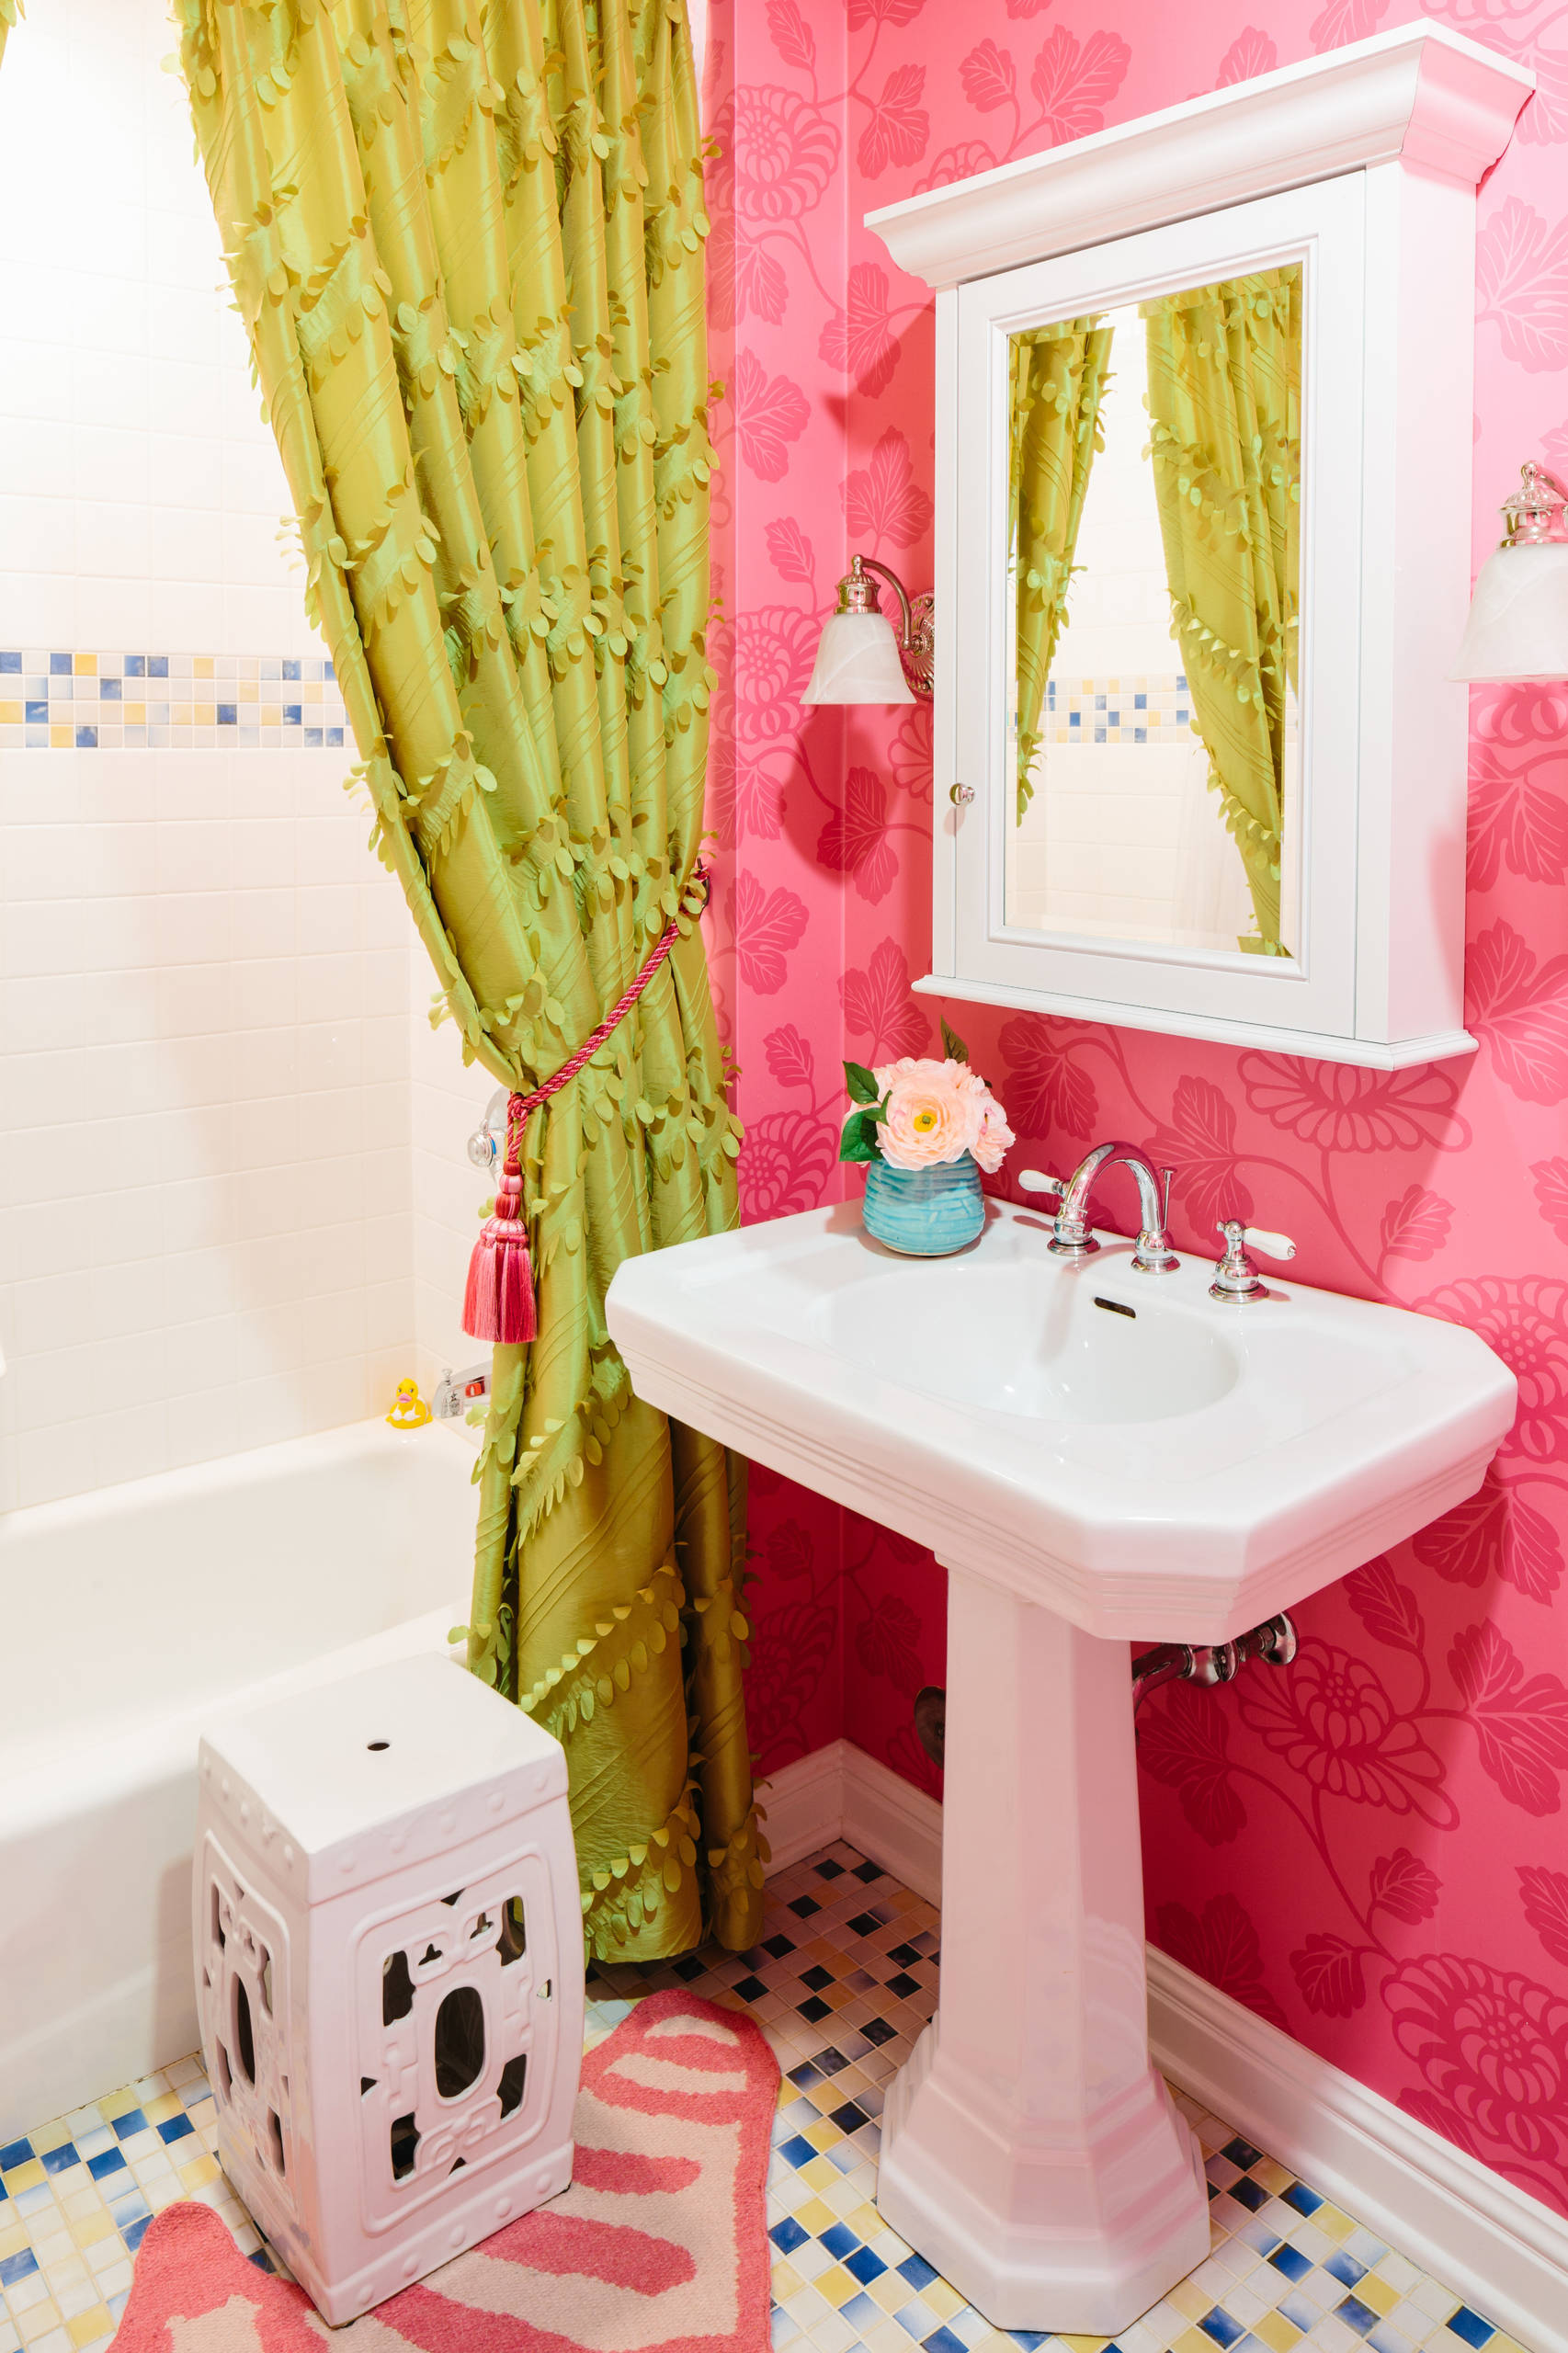 Unique pink pedestal sink for sale 75 Beautiful Pink Bathroom With A Pedestal Sink Pictures Ideas August 2021 Houzz